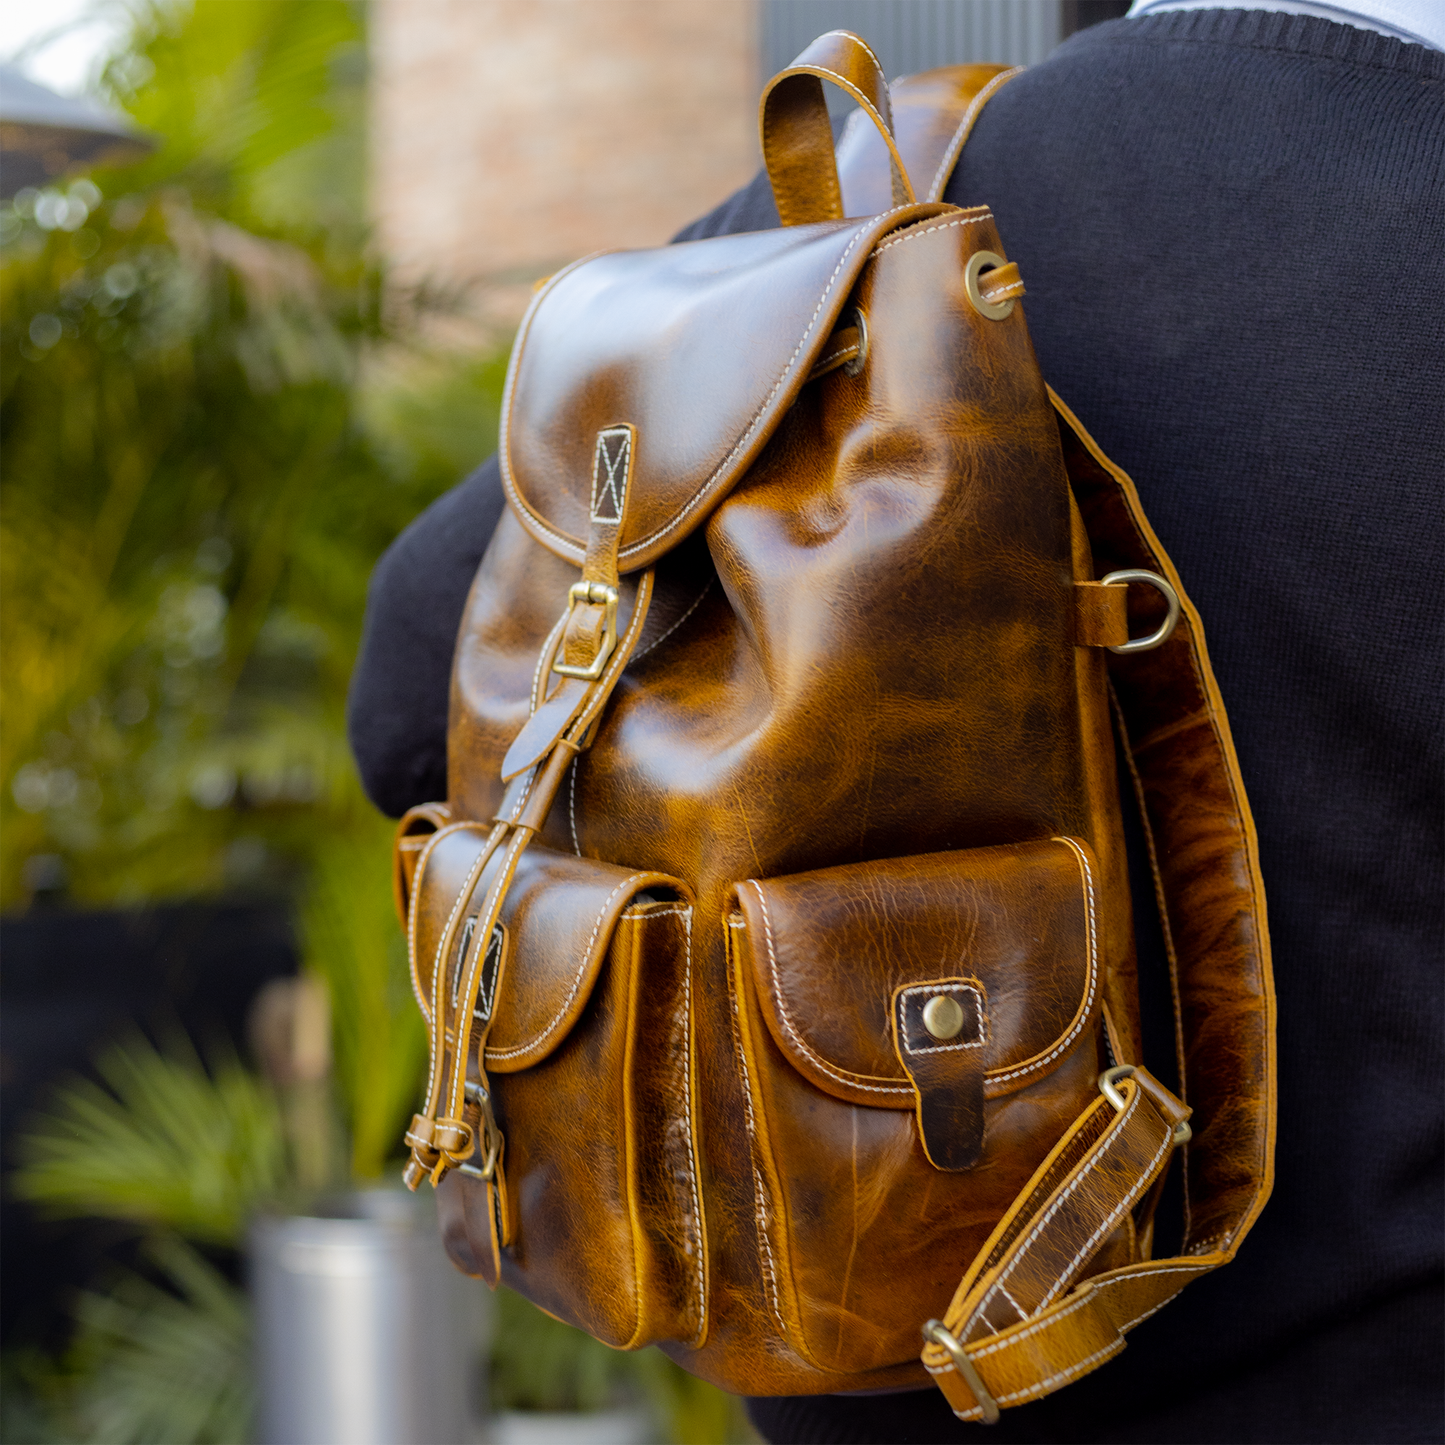 Chic and Sturdy: Men's Tan Leather Backpack – A Fashionable Journey